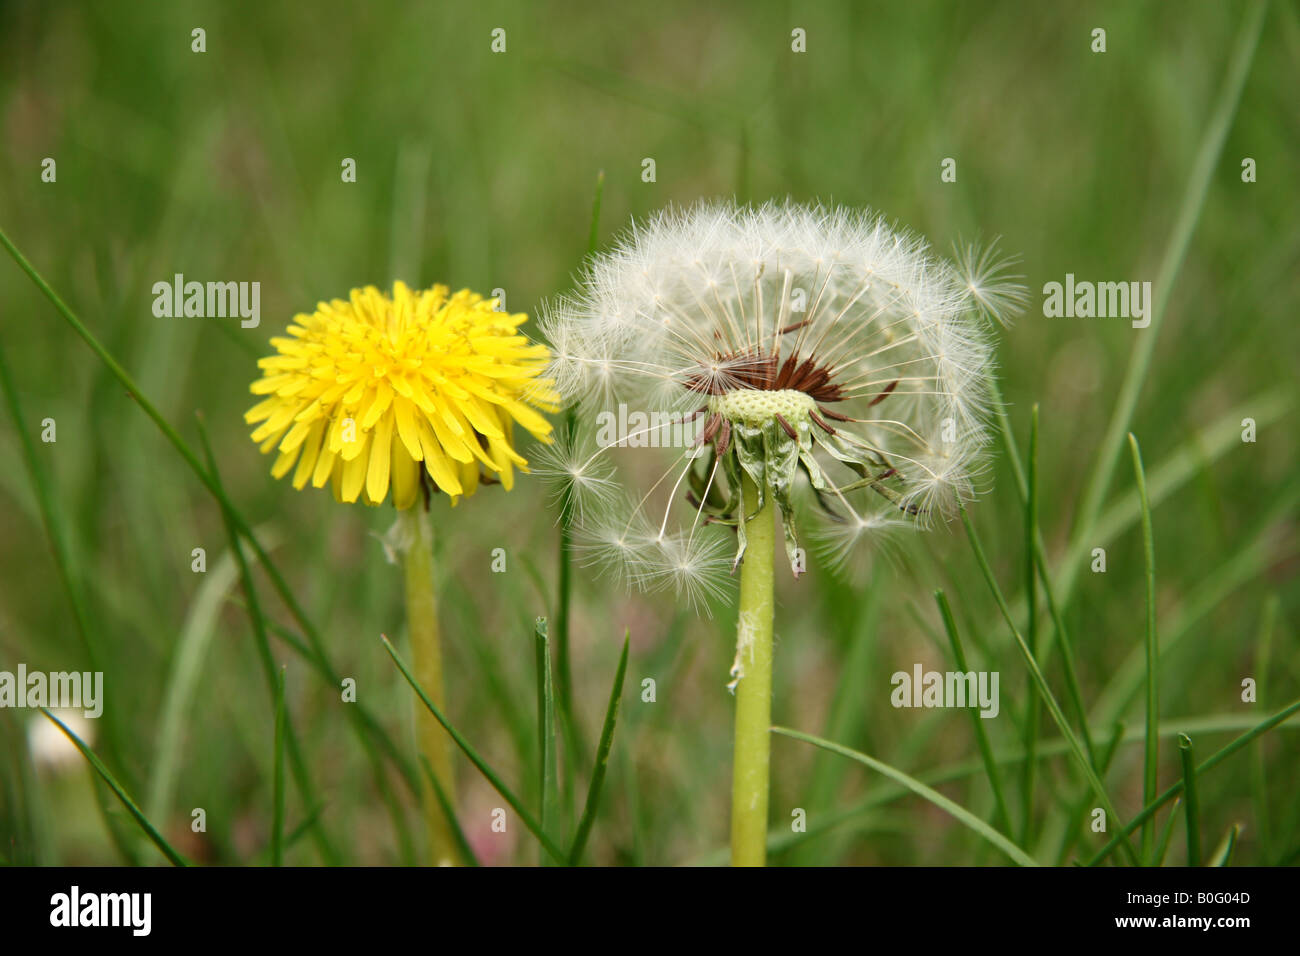 Dandelion flower and dandelion clock, showing the pericarp and the achenes. Stock Photo